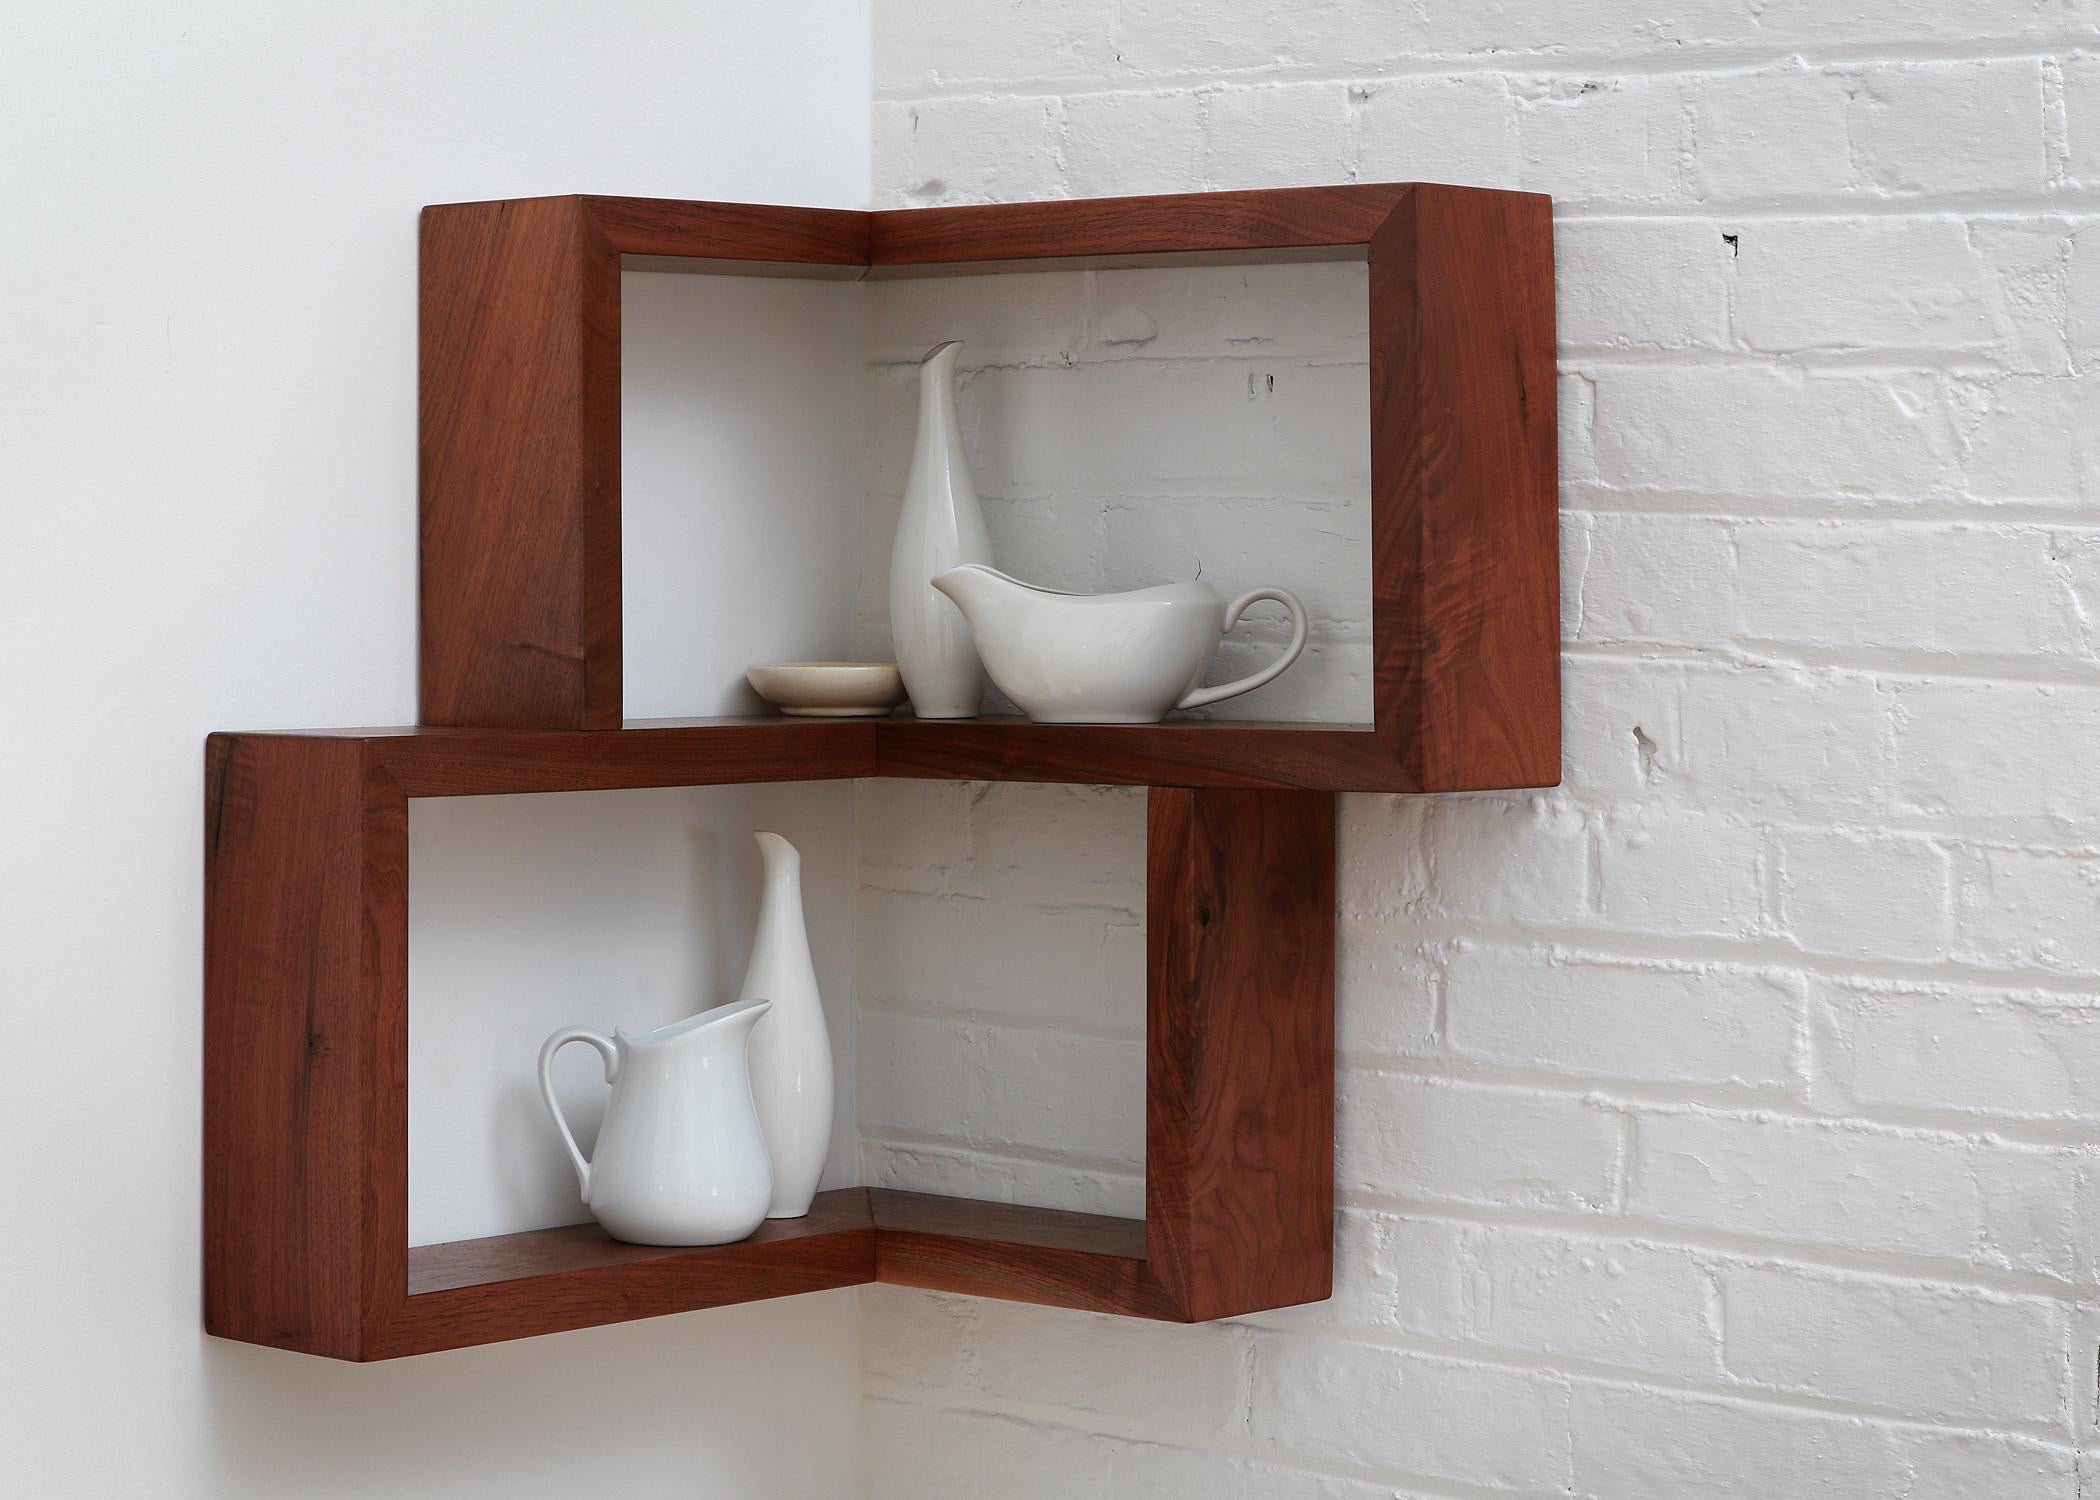 The award nominated Franklin Shelf is a 90 degree corner shelf. This unique design allows for maximum storage space, while occupying a very small area. The smooth wooden finish of this shelf will make a great addition to any corner, table, or